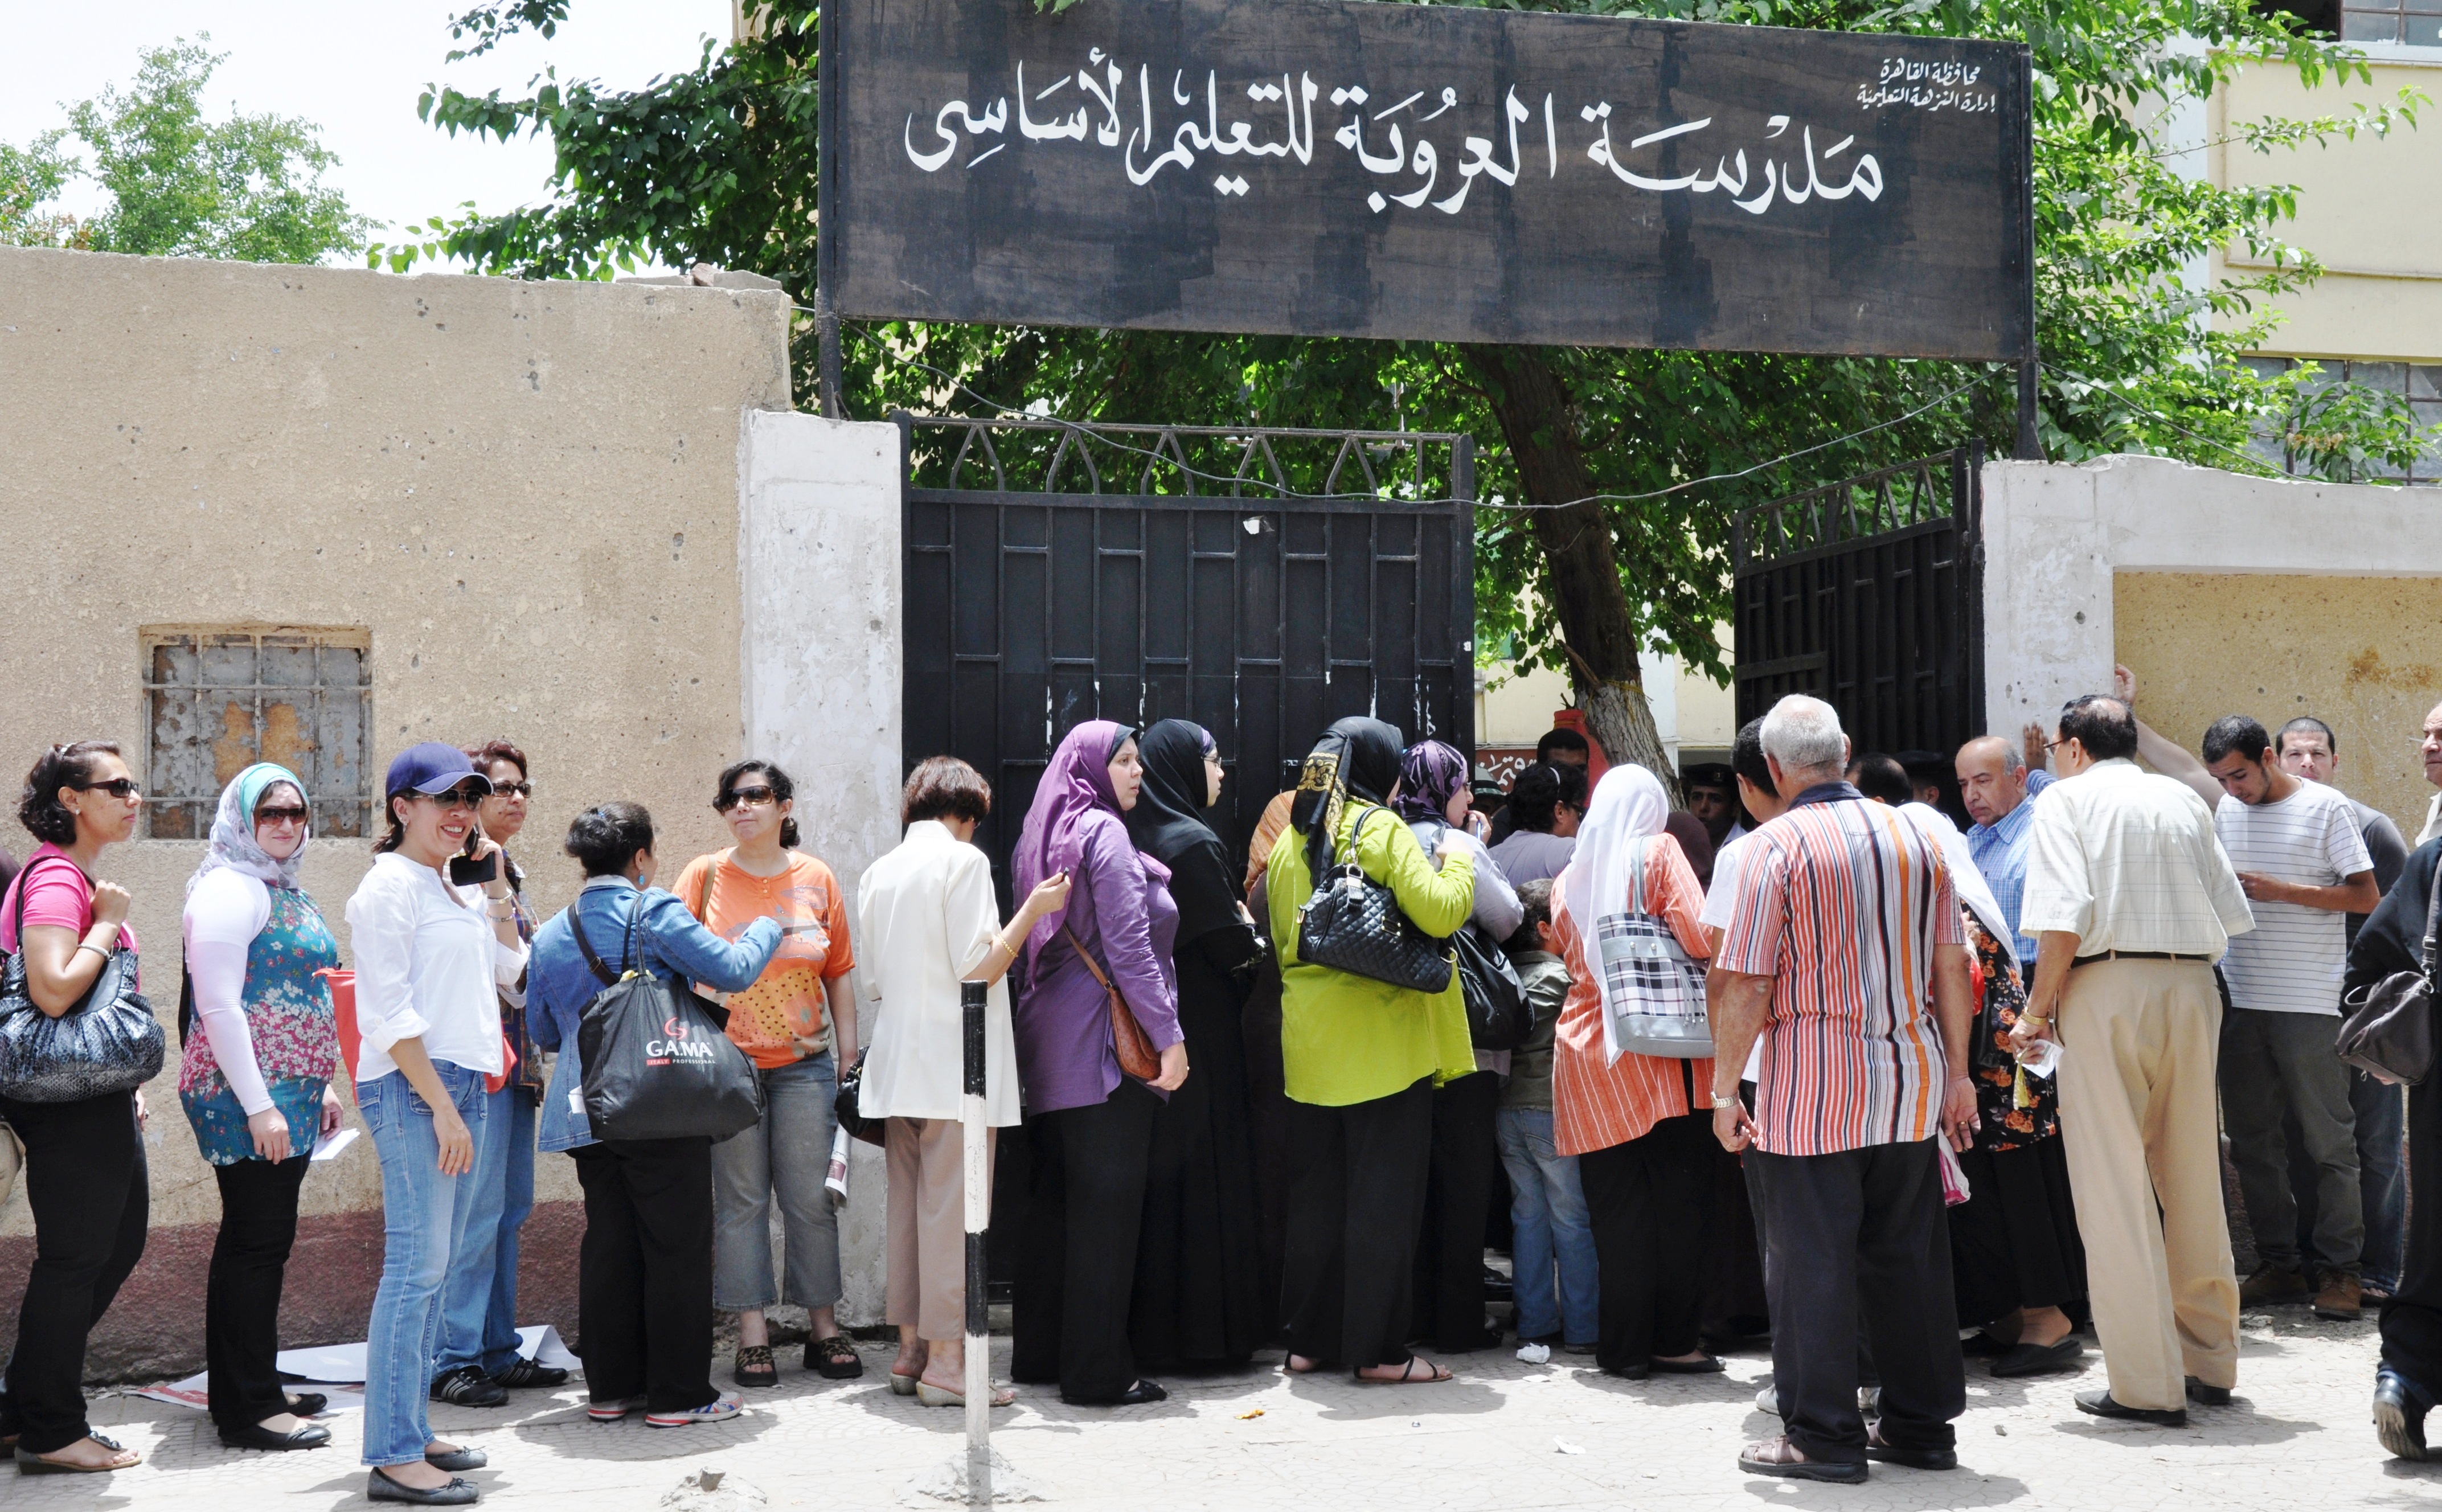 Elections in Egypt, 2012 (photo credit: UN Women Arab States)